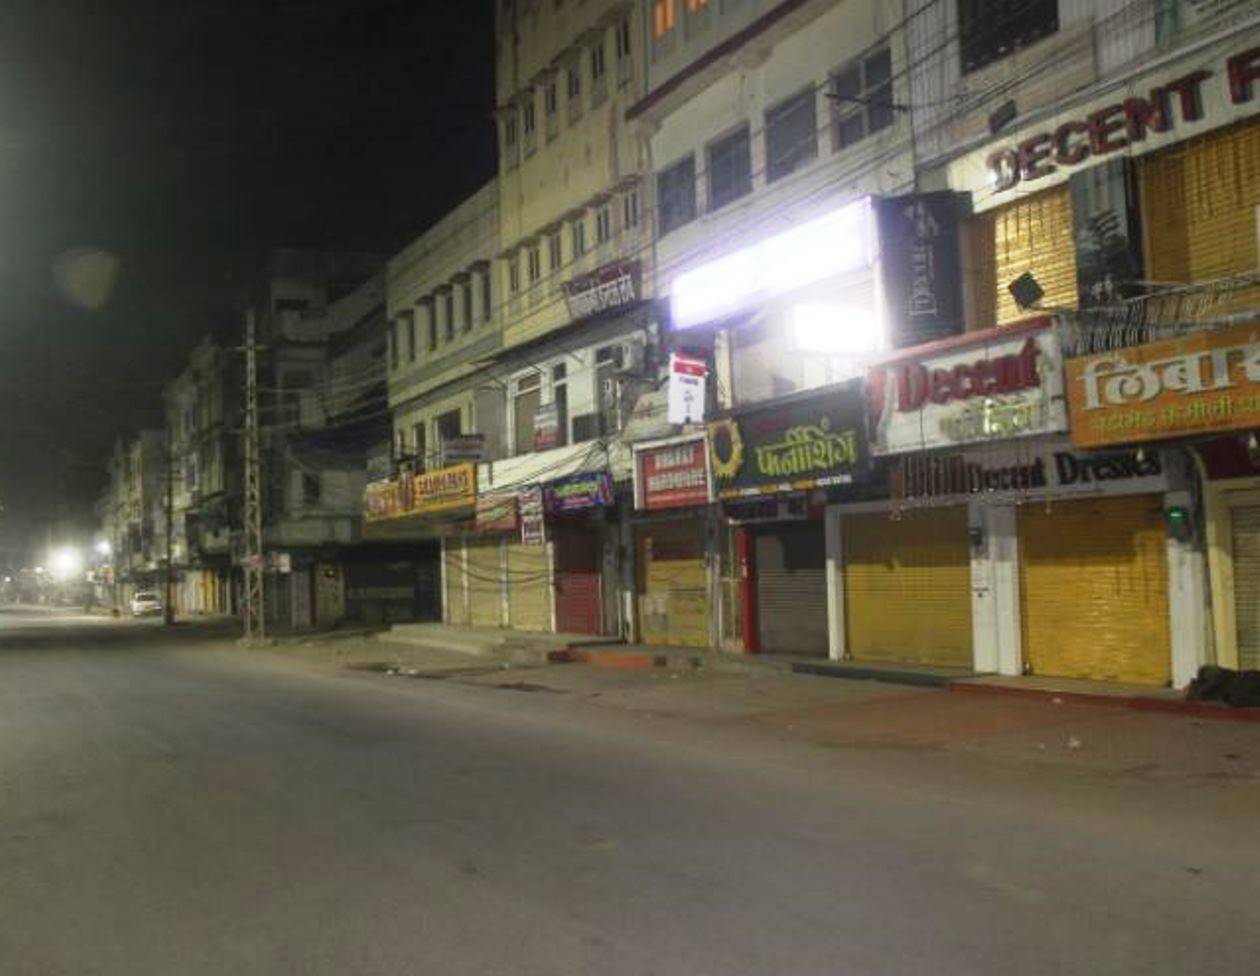 Udaipur lockdown for 12 hrs - Curfew from 6pm to 6am from 10 April, market to close at 5pm